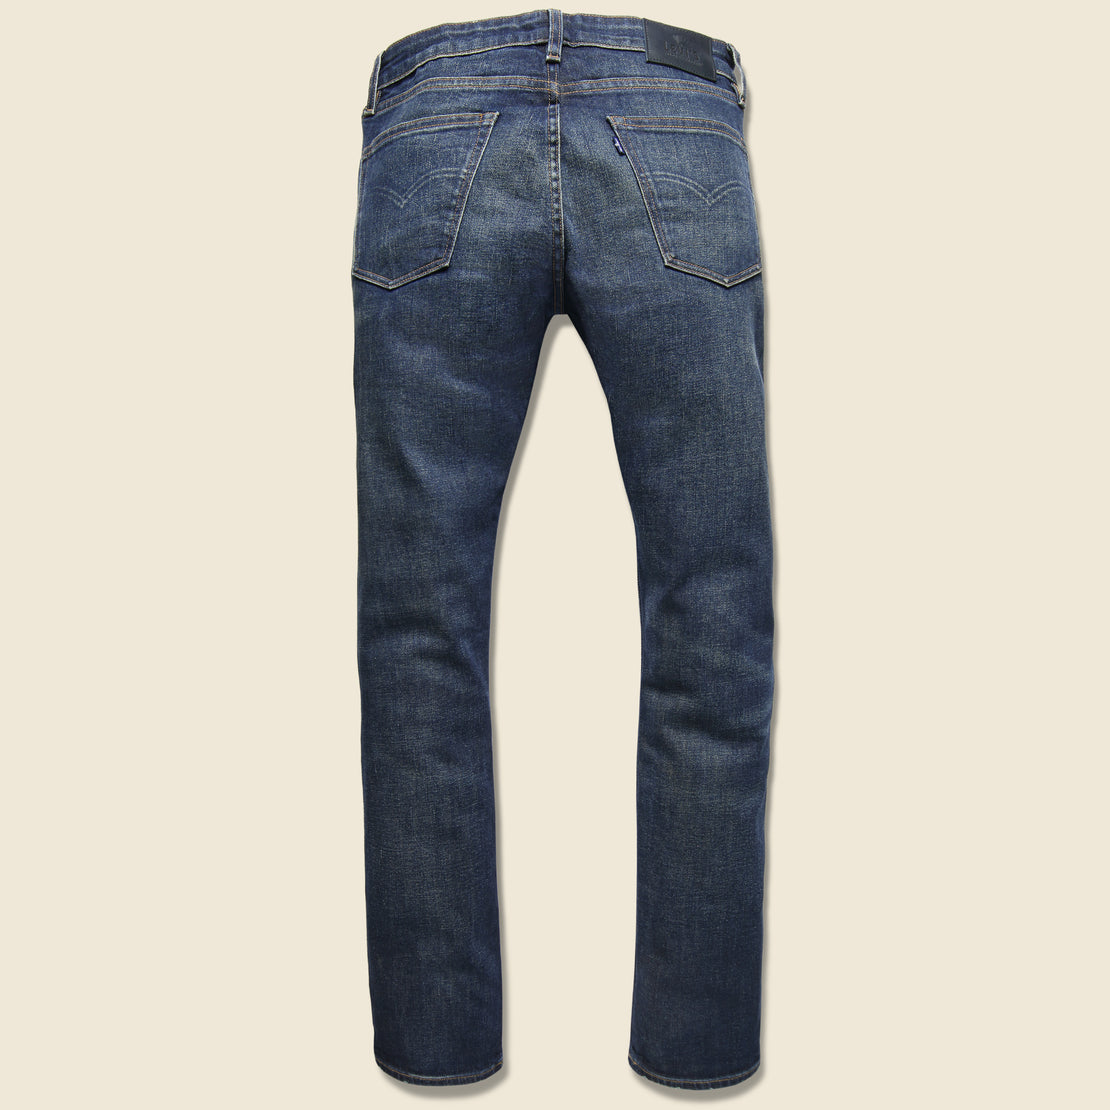 Tack Slim Jean - Cortez - Levis Made & Crafted - STAG Provisions - Pants - Denim